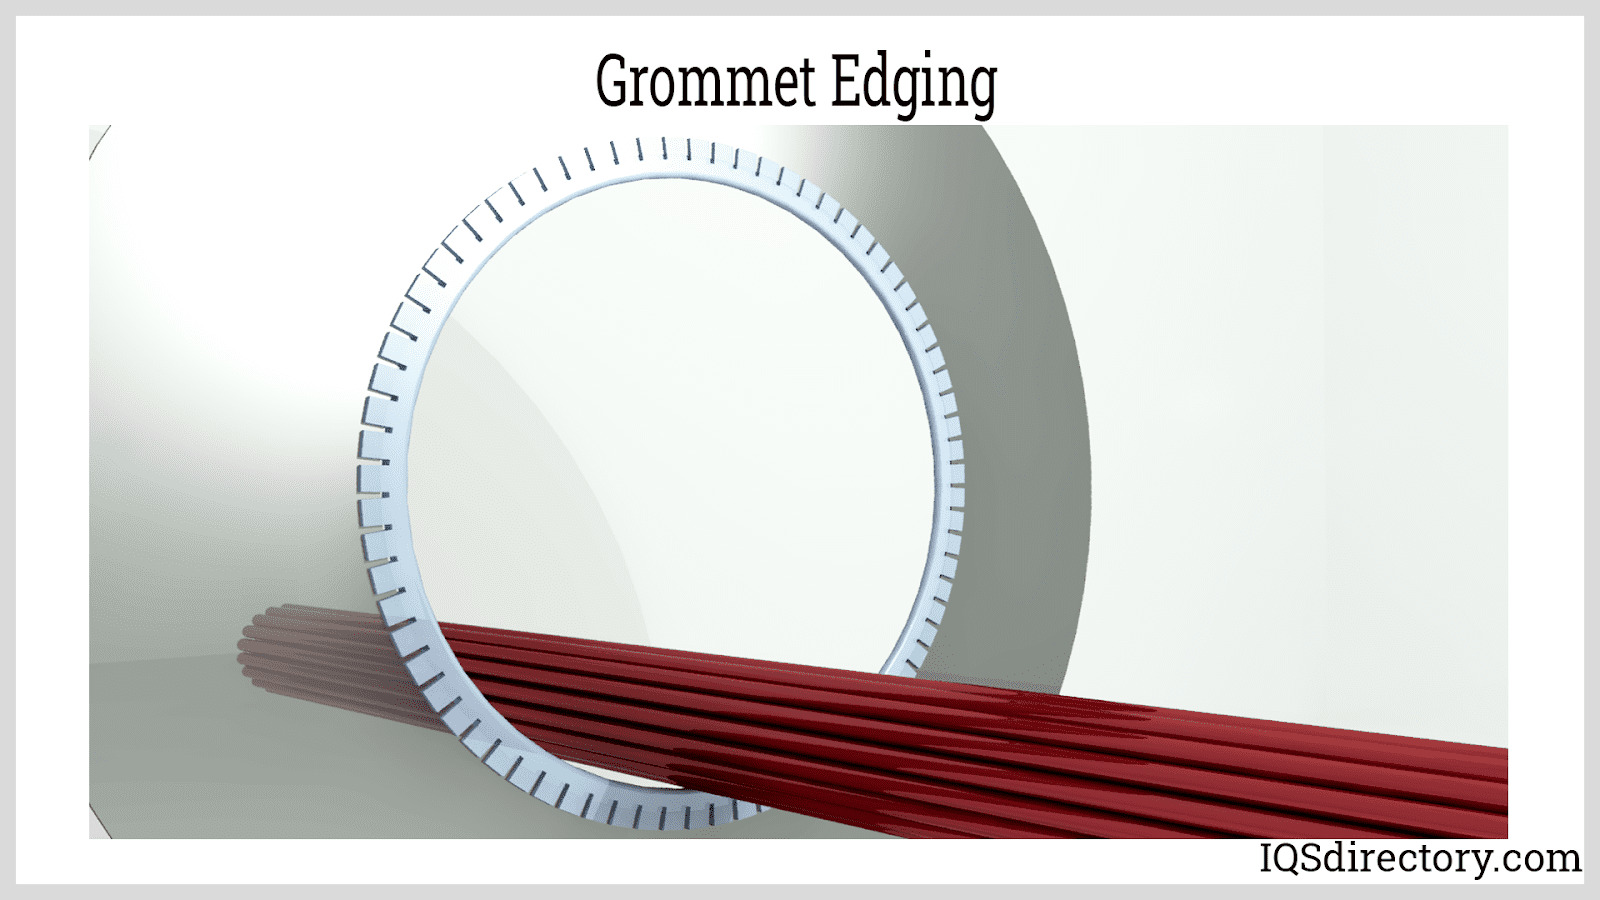 Grommet Edging: What Is It? How Is It Made? Materials